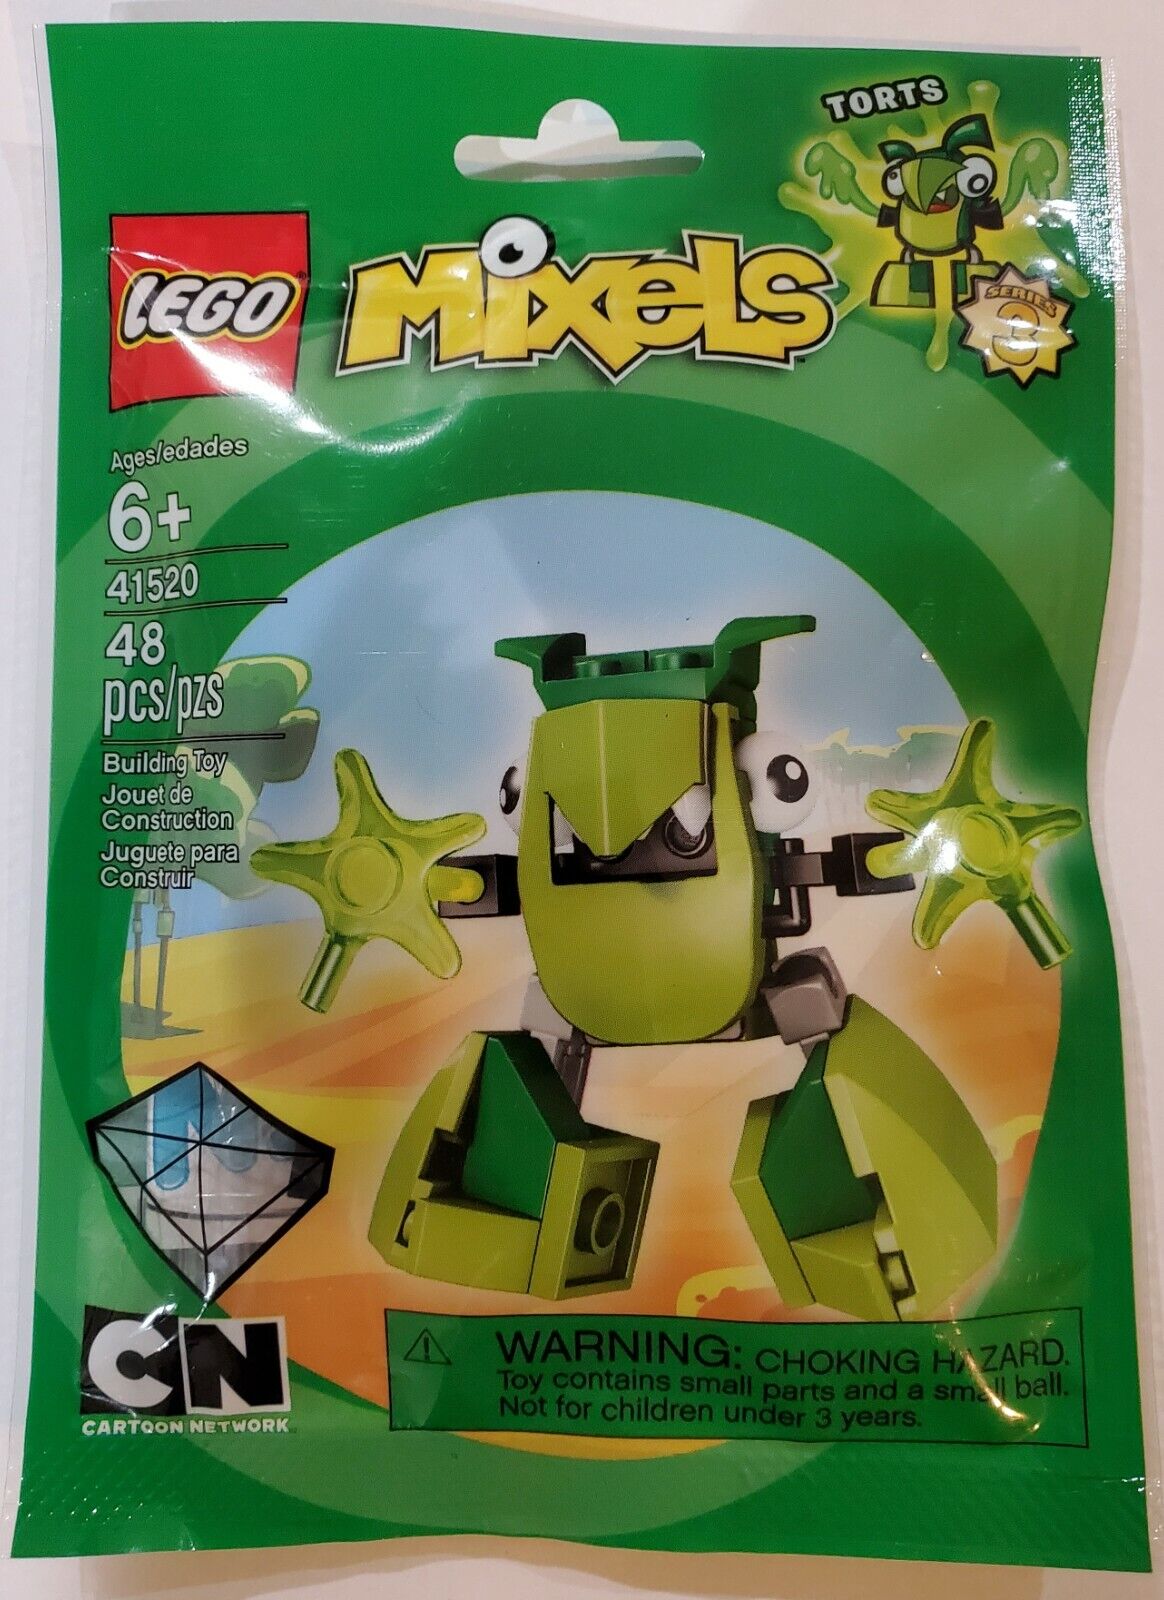 Lego Mixels TORTS 41520 Unopened 48pc Building Set, Complete in Polybag, NIB